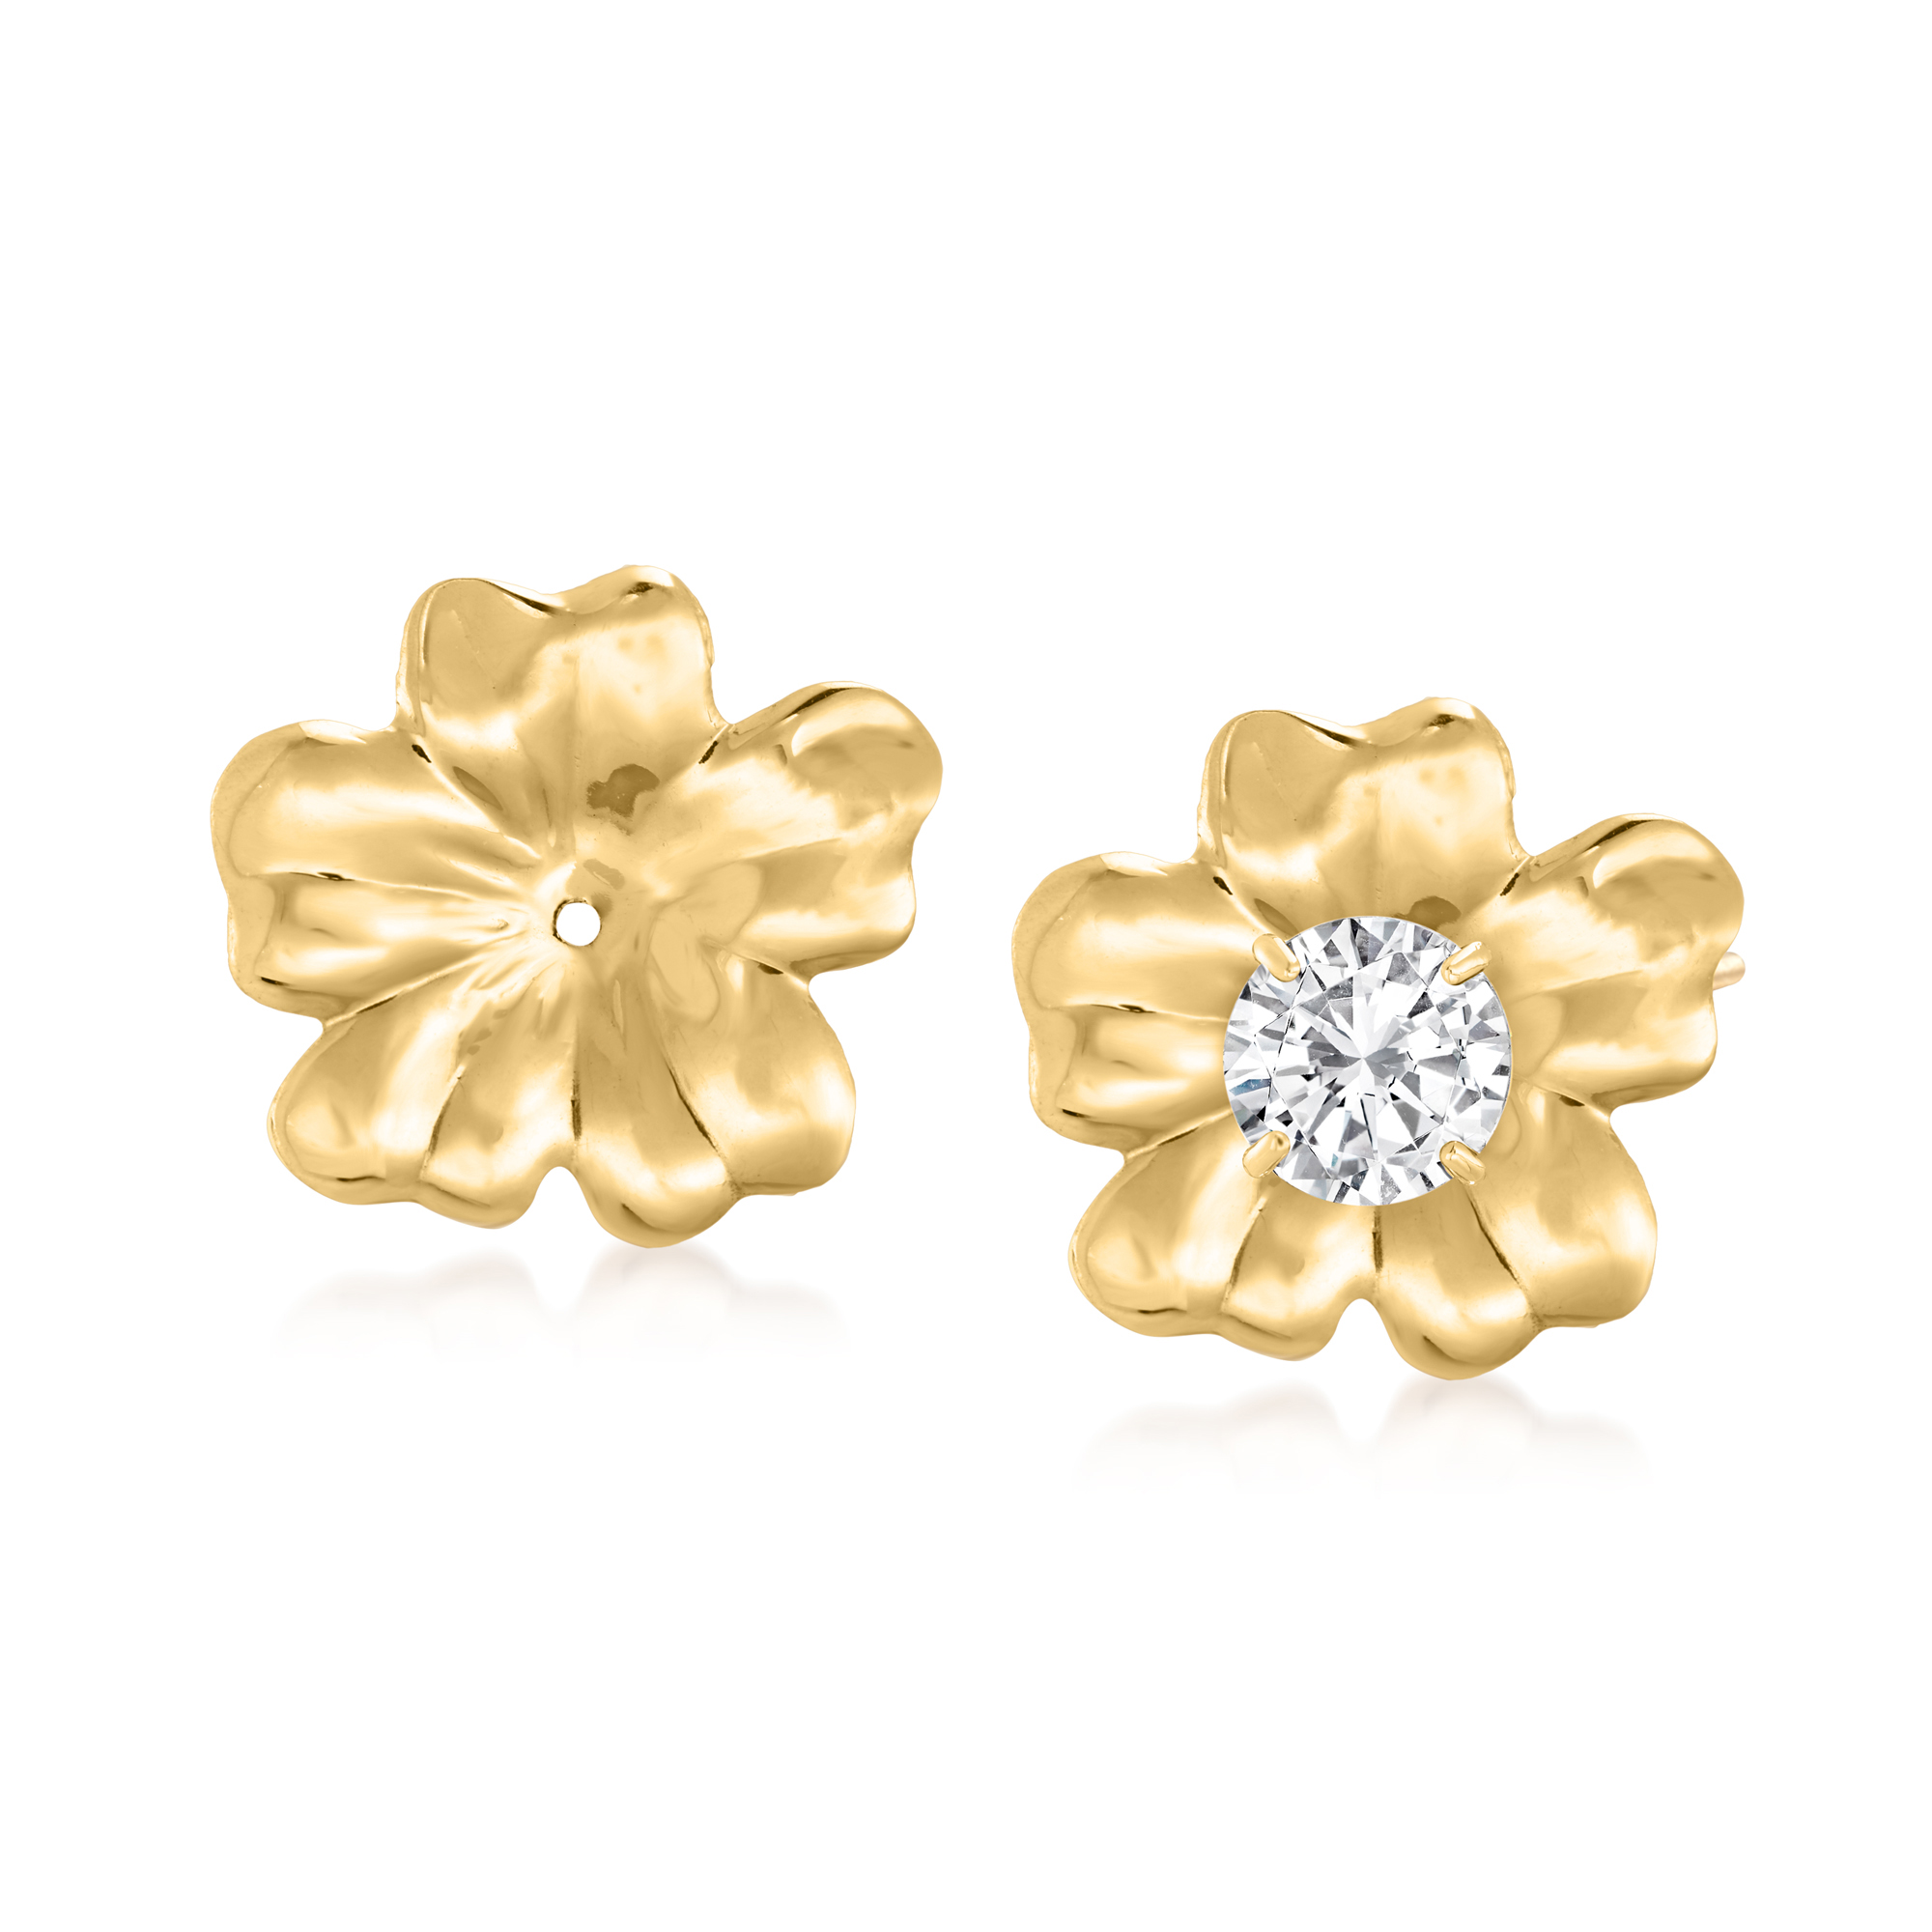 Finejewelers 14k Yellow Gold Polished Floral Earring Jackets 